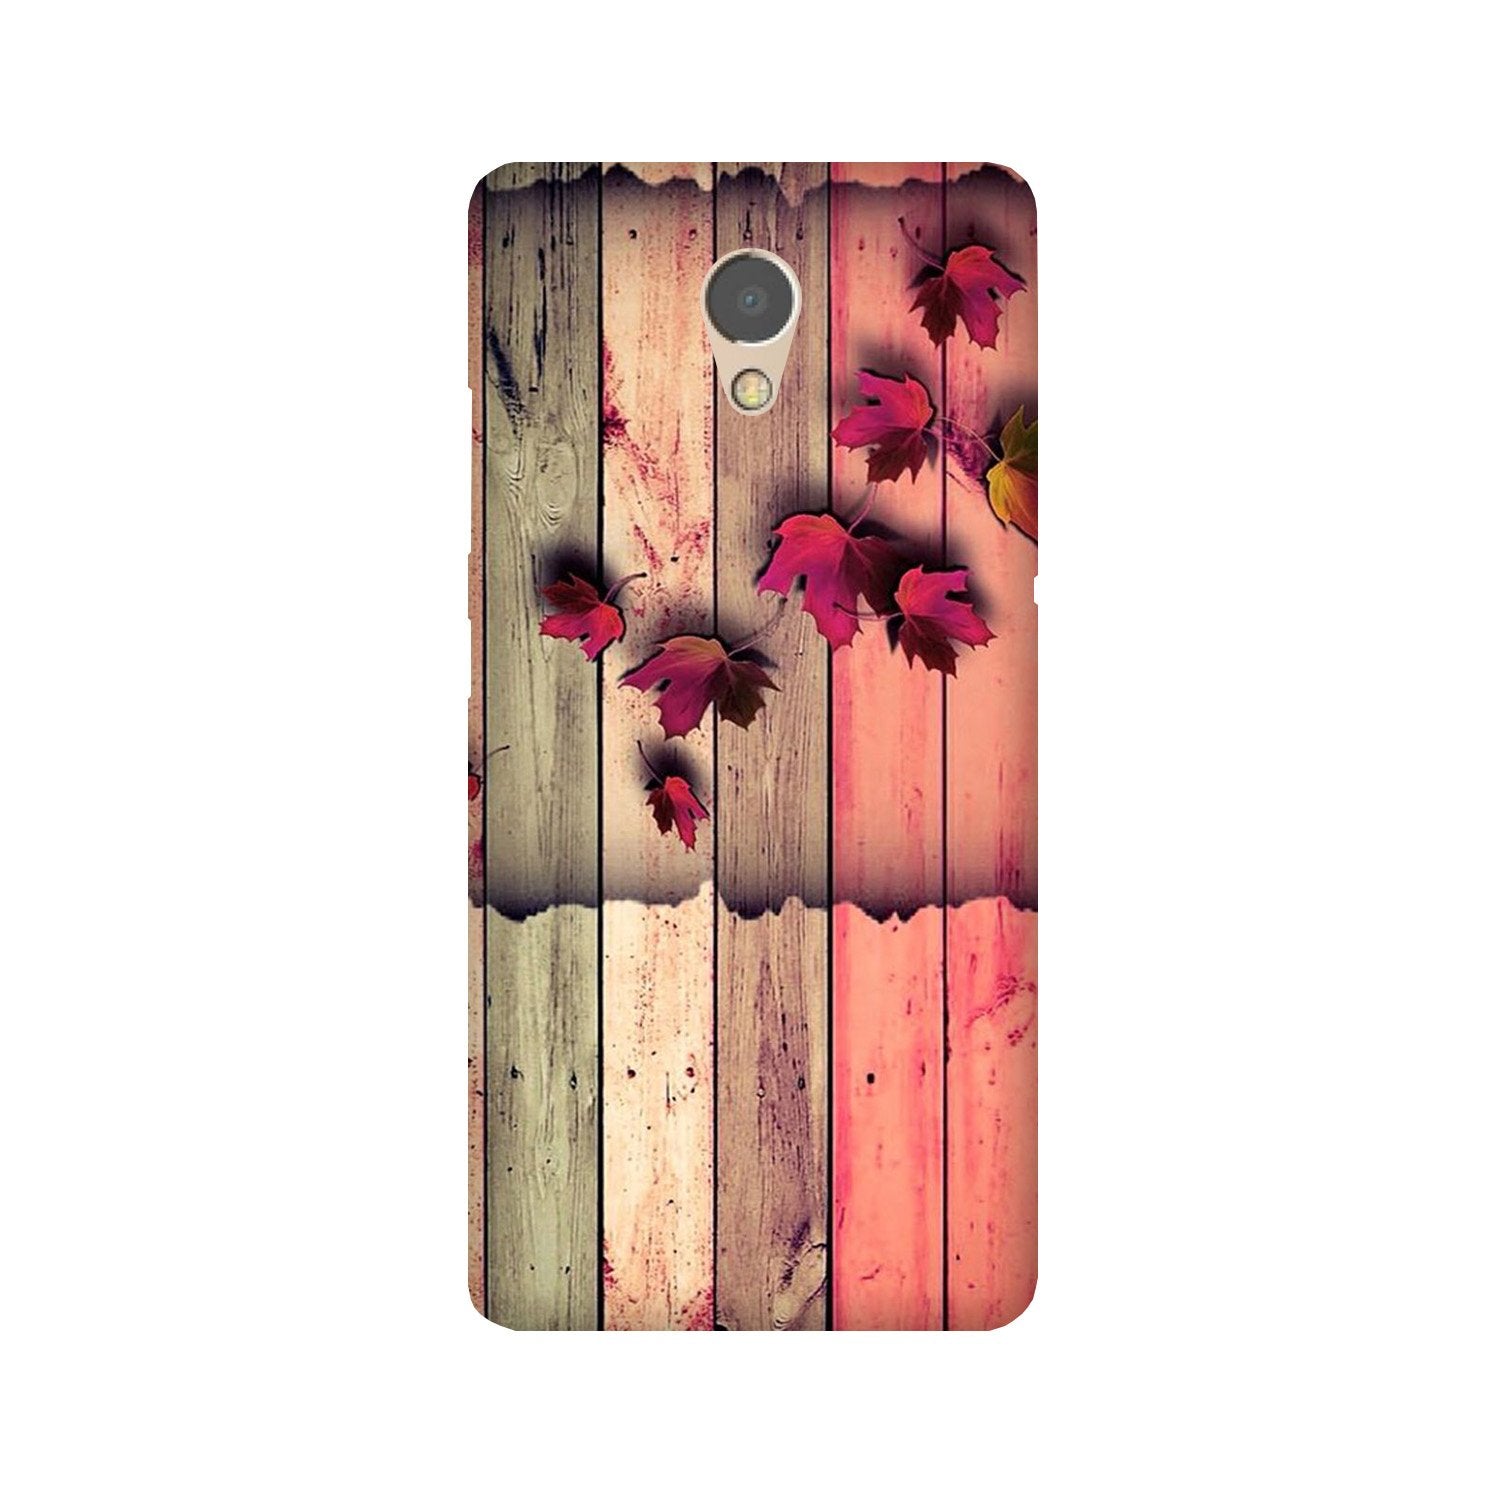 Wooden look2 Case for Lenovo P2